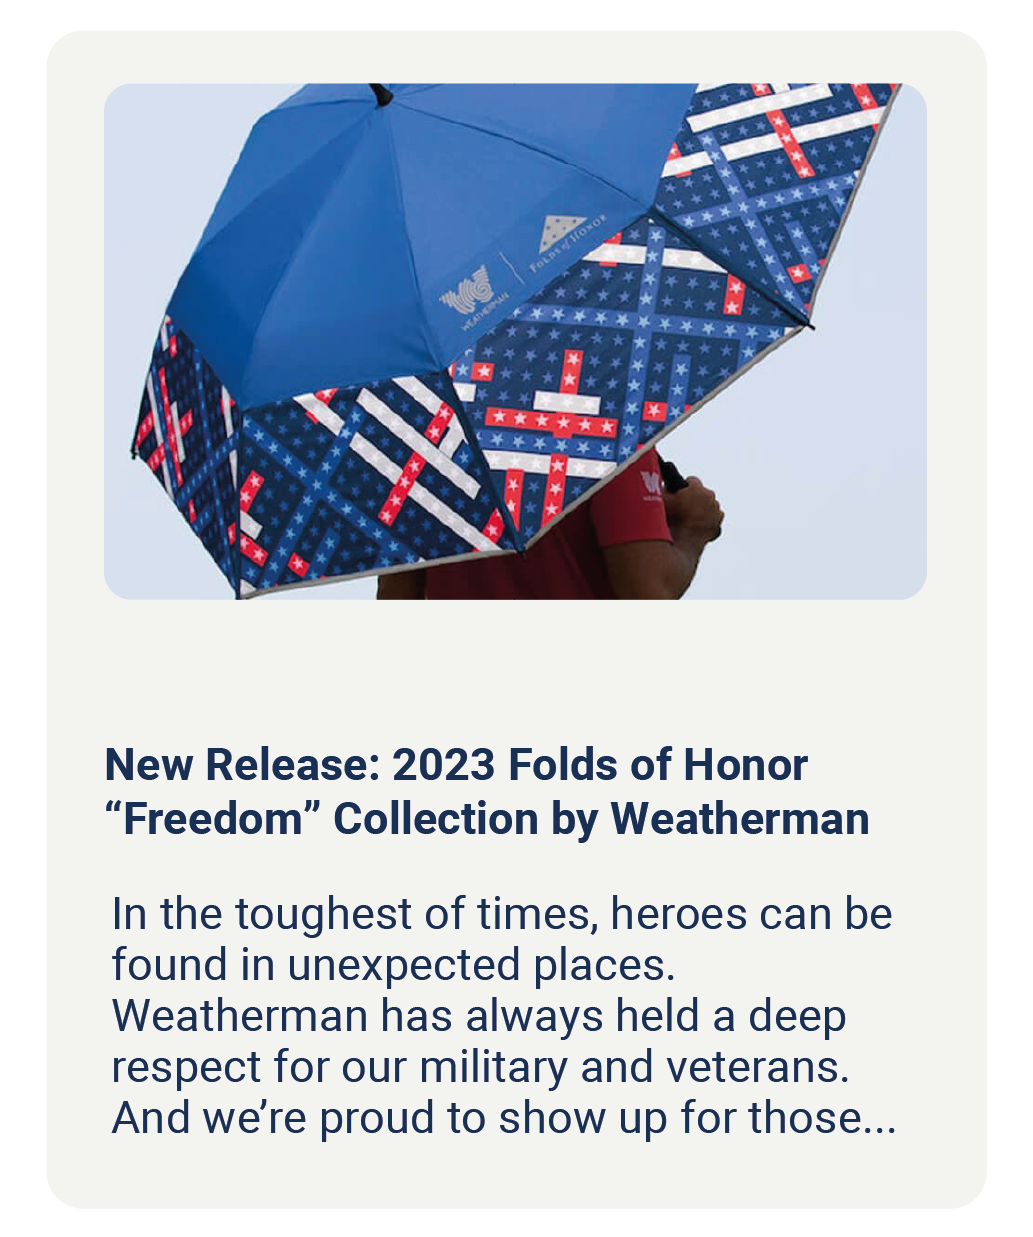 New Release: 2023 Folds of Honor “Freedom” Collection by Weatherman